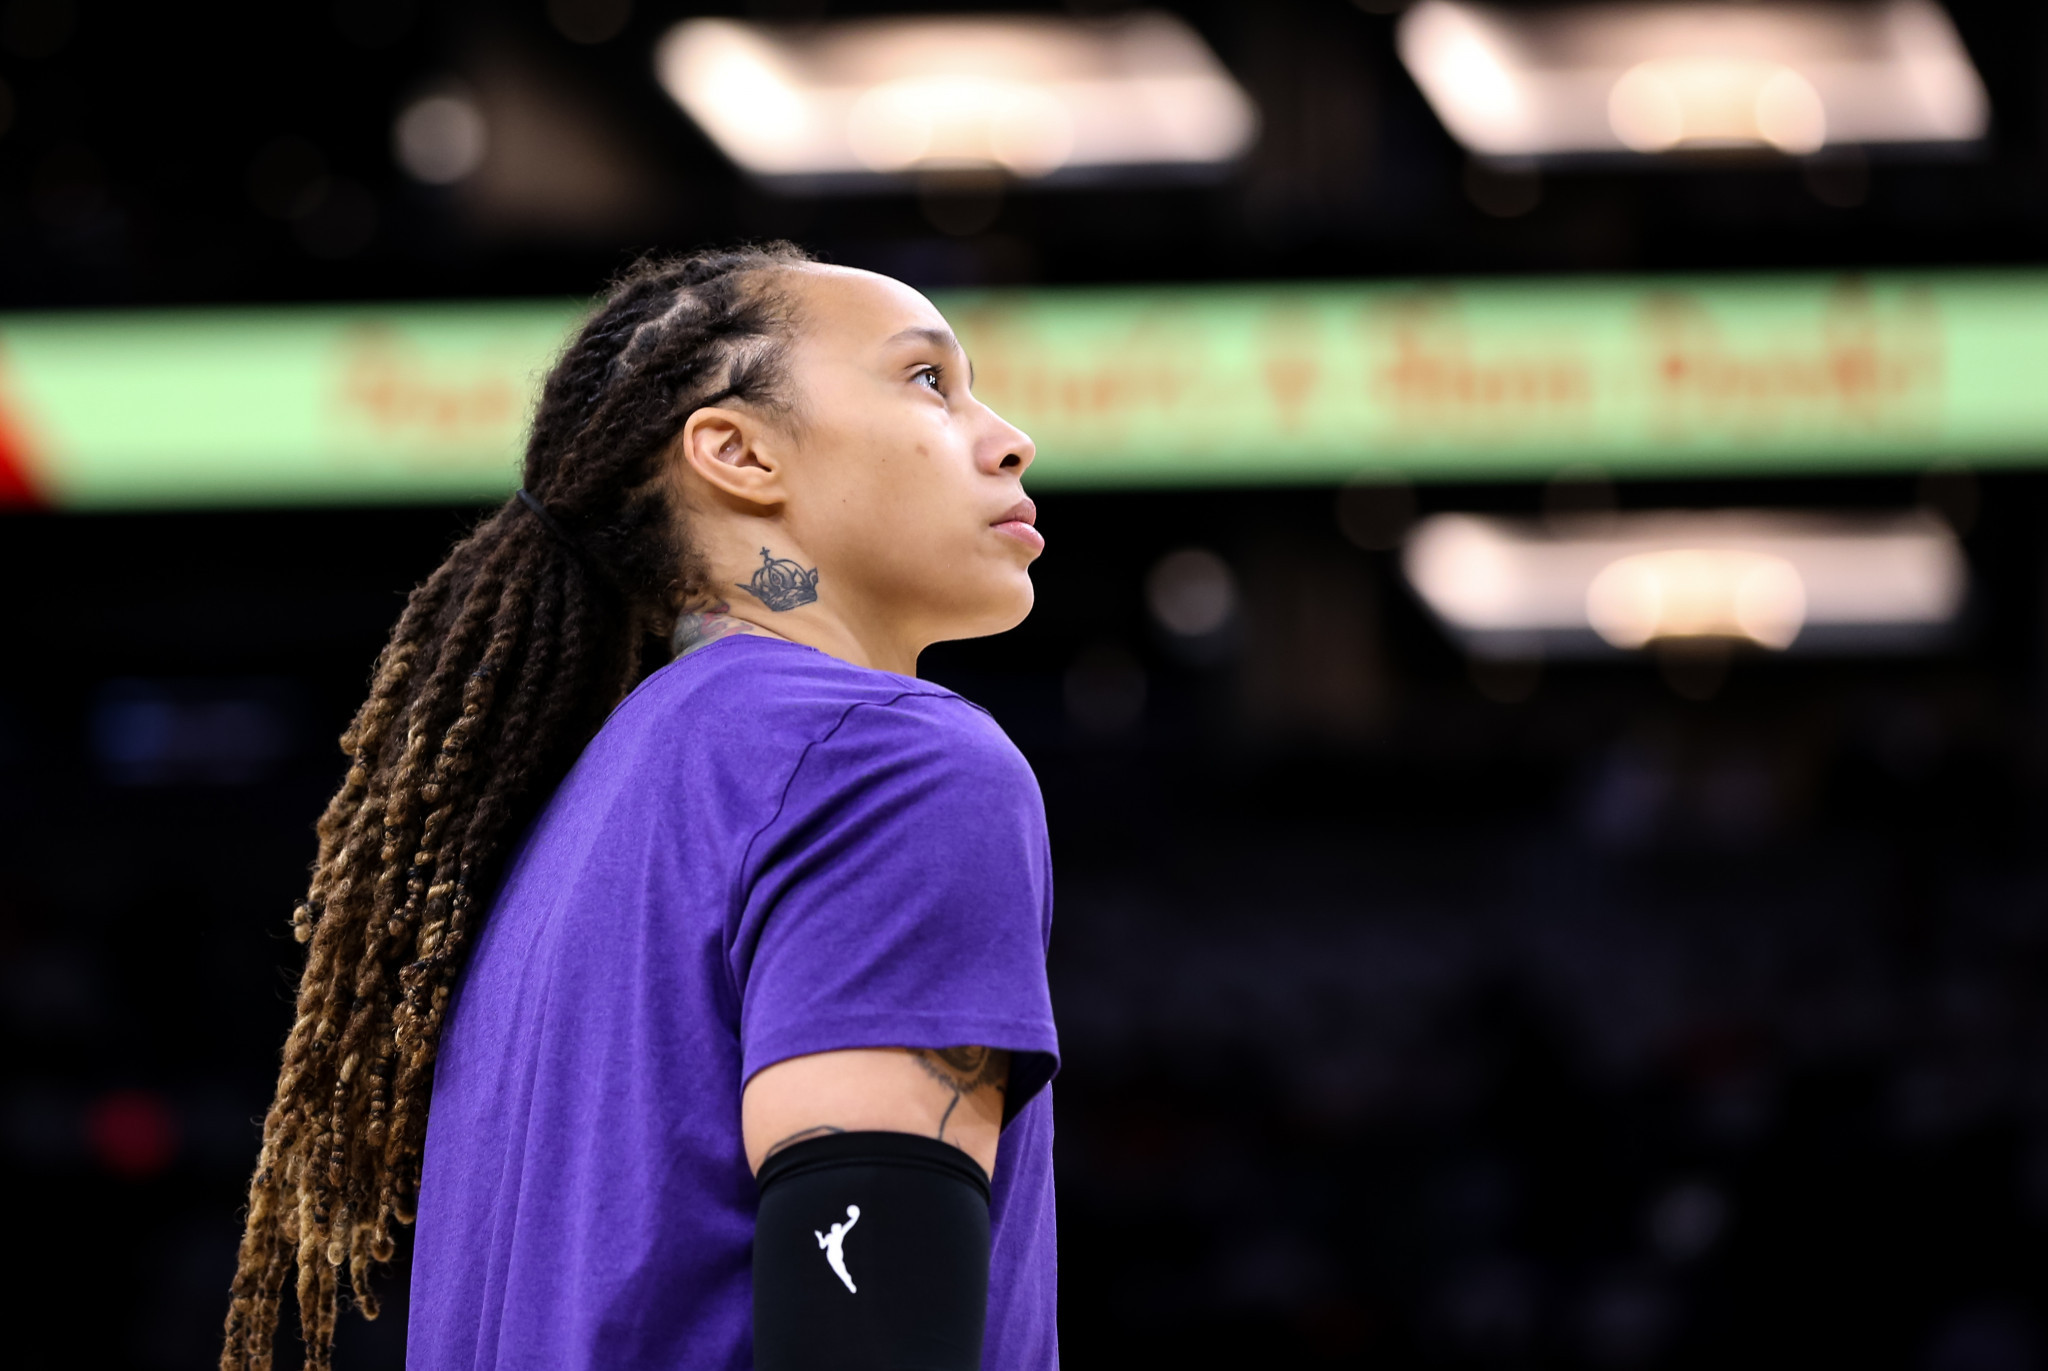 US State Department calls for Russia to provide consistent access to detained basketball star Griner